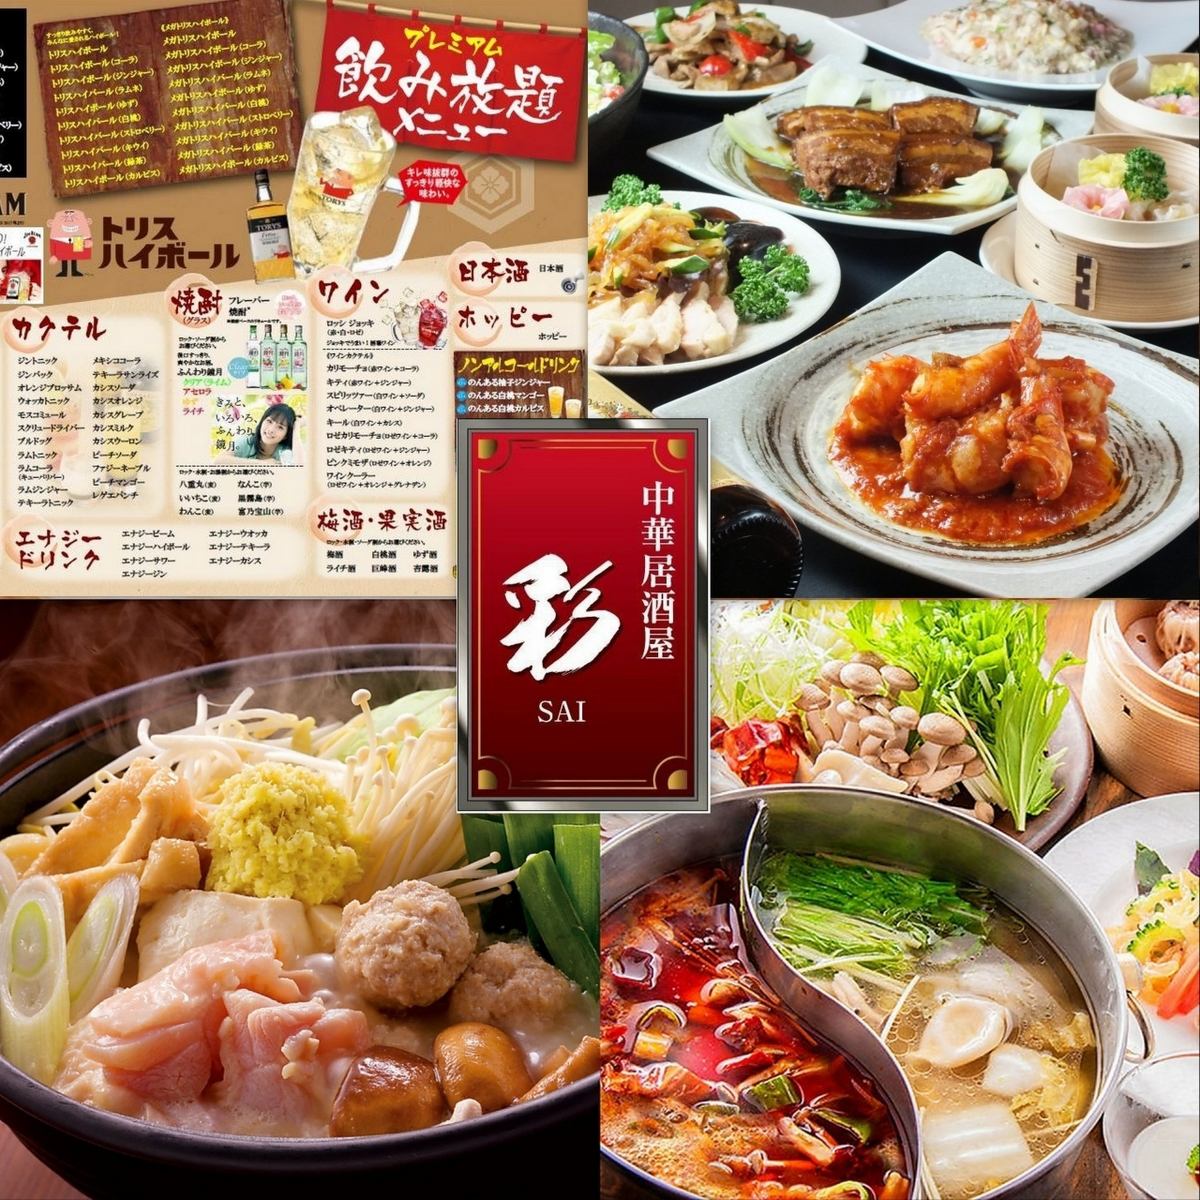 Private banquet ♪ Authentic Chinese & Izakaya menu all-you-can-eat and drink course also available! Near the station Smoking allowed